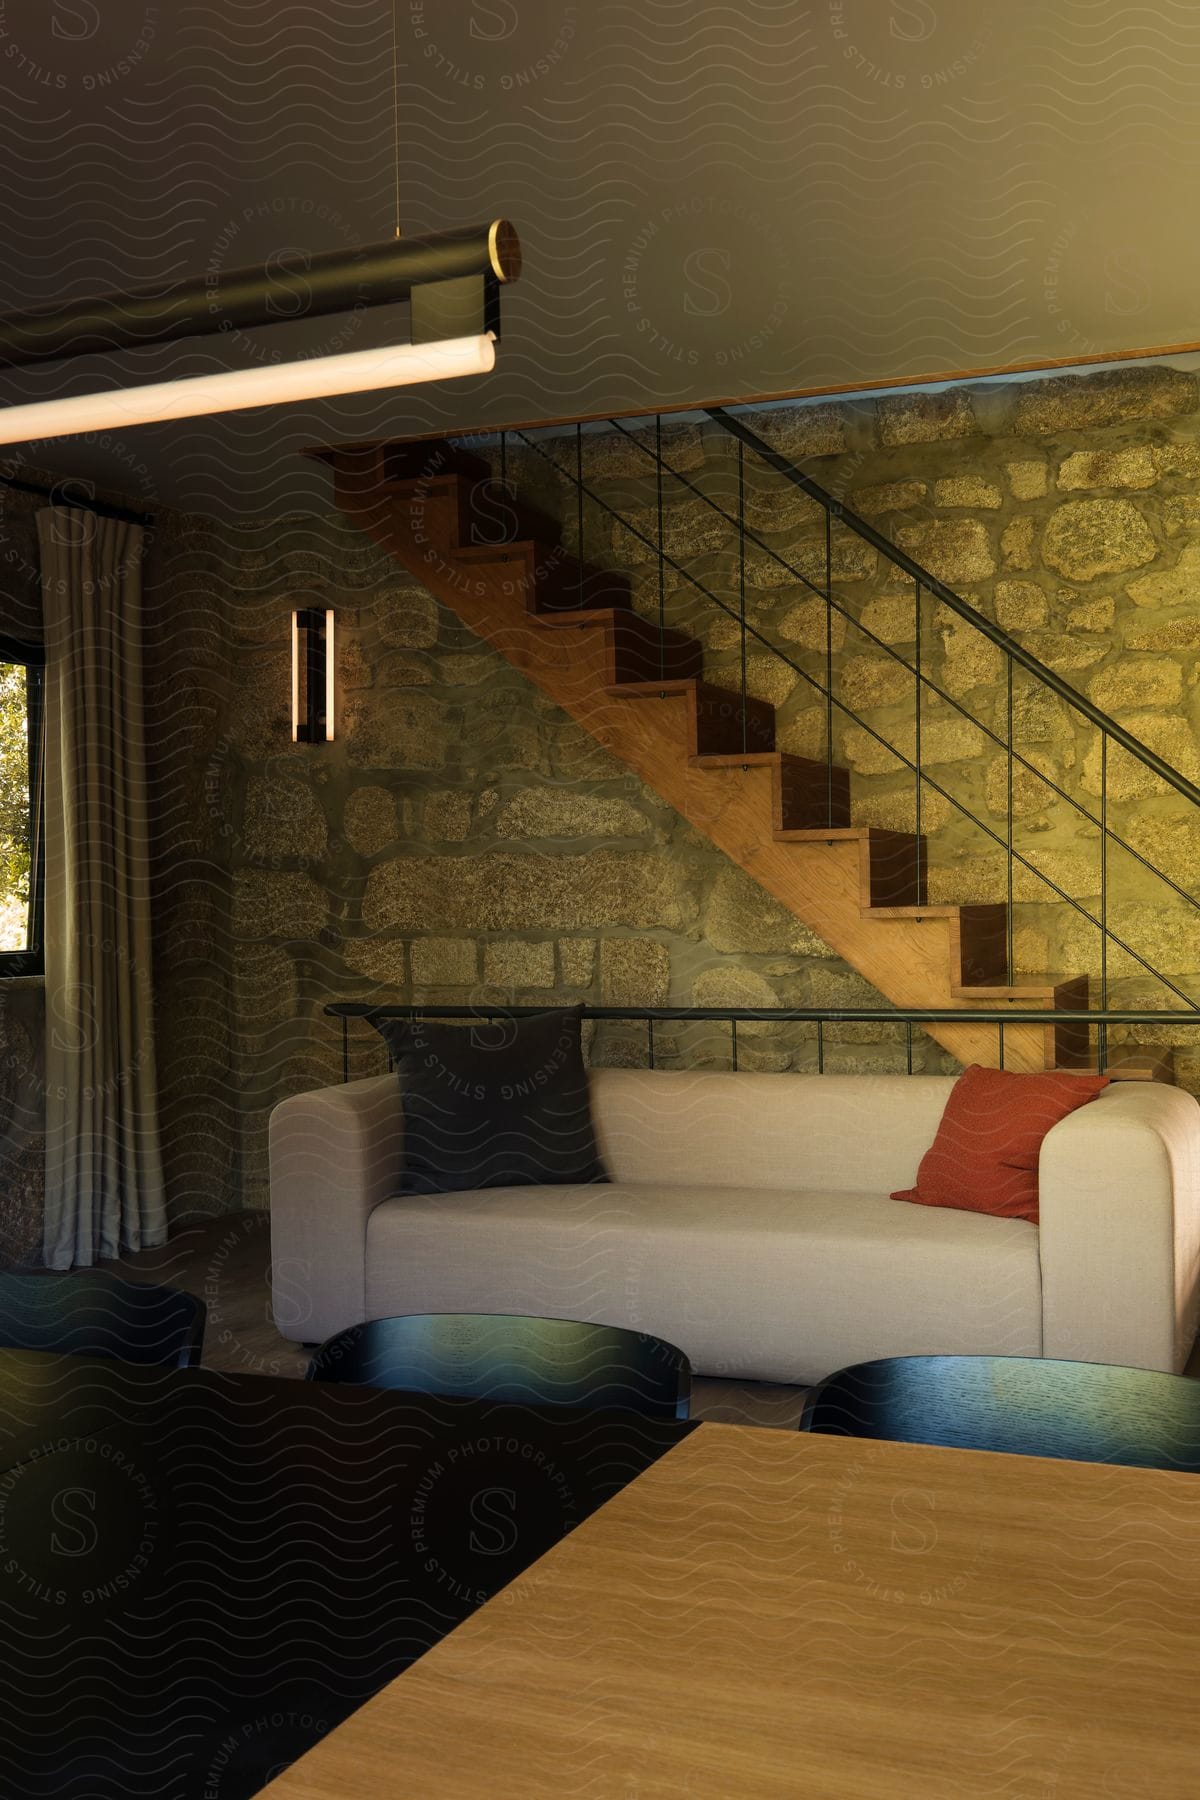 Living room with a beige sofa adorned with black and orange cushions. Above the sofa, a wooden staircase with a minimalist black railing ascends against a rustic stone wall.